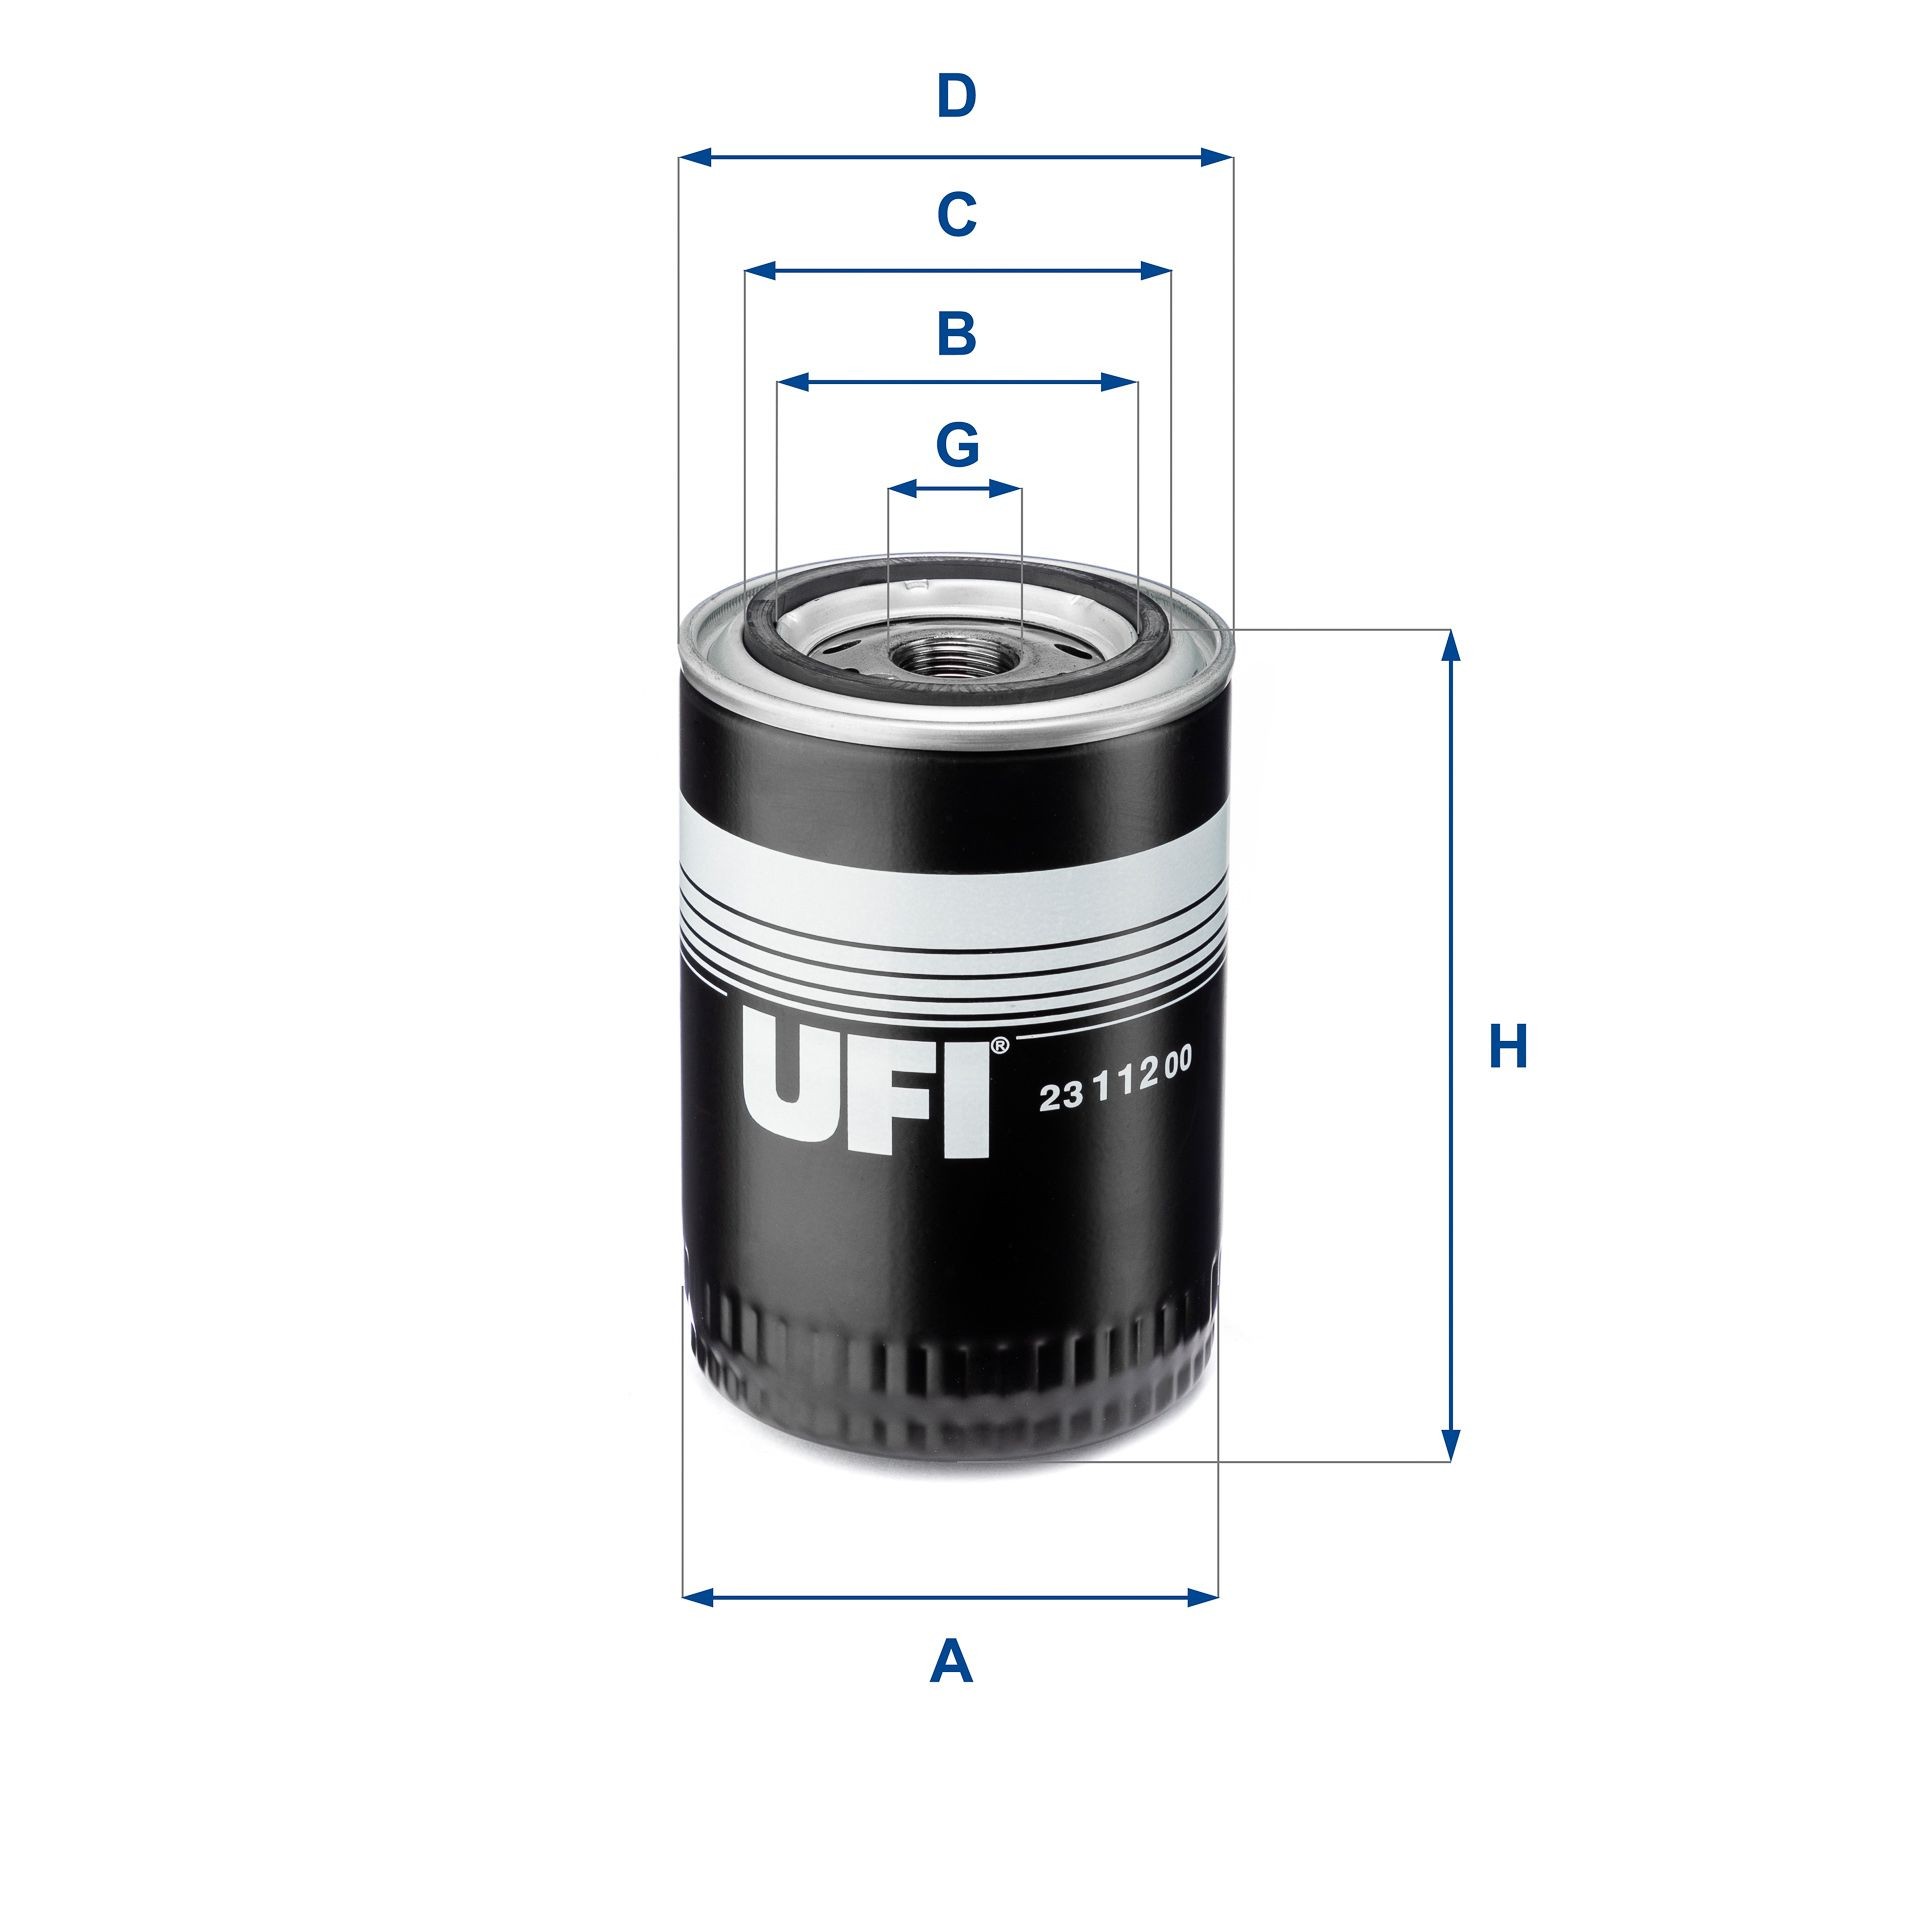 UFI 23.112.00 Oil filter 13/16-16 UNF, with one anti-return valve, Spin-on Filter